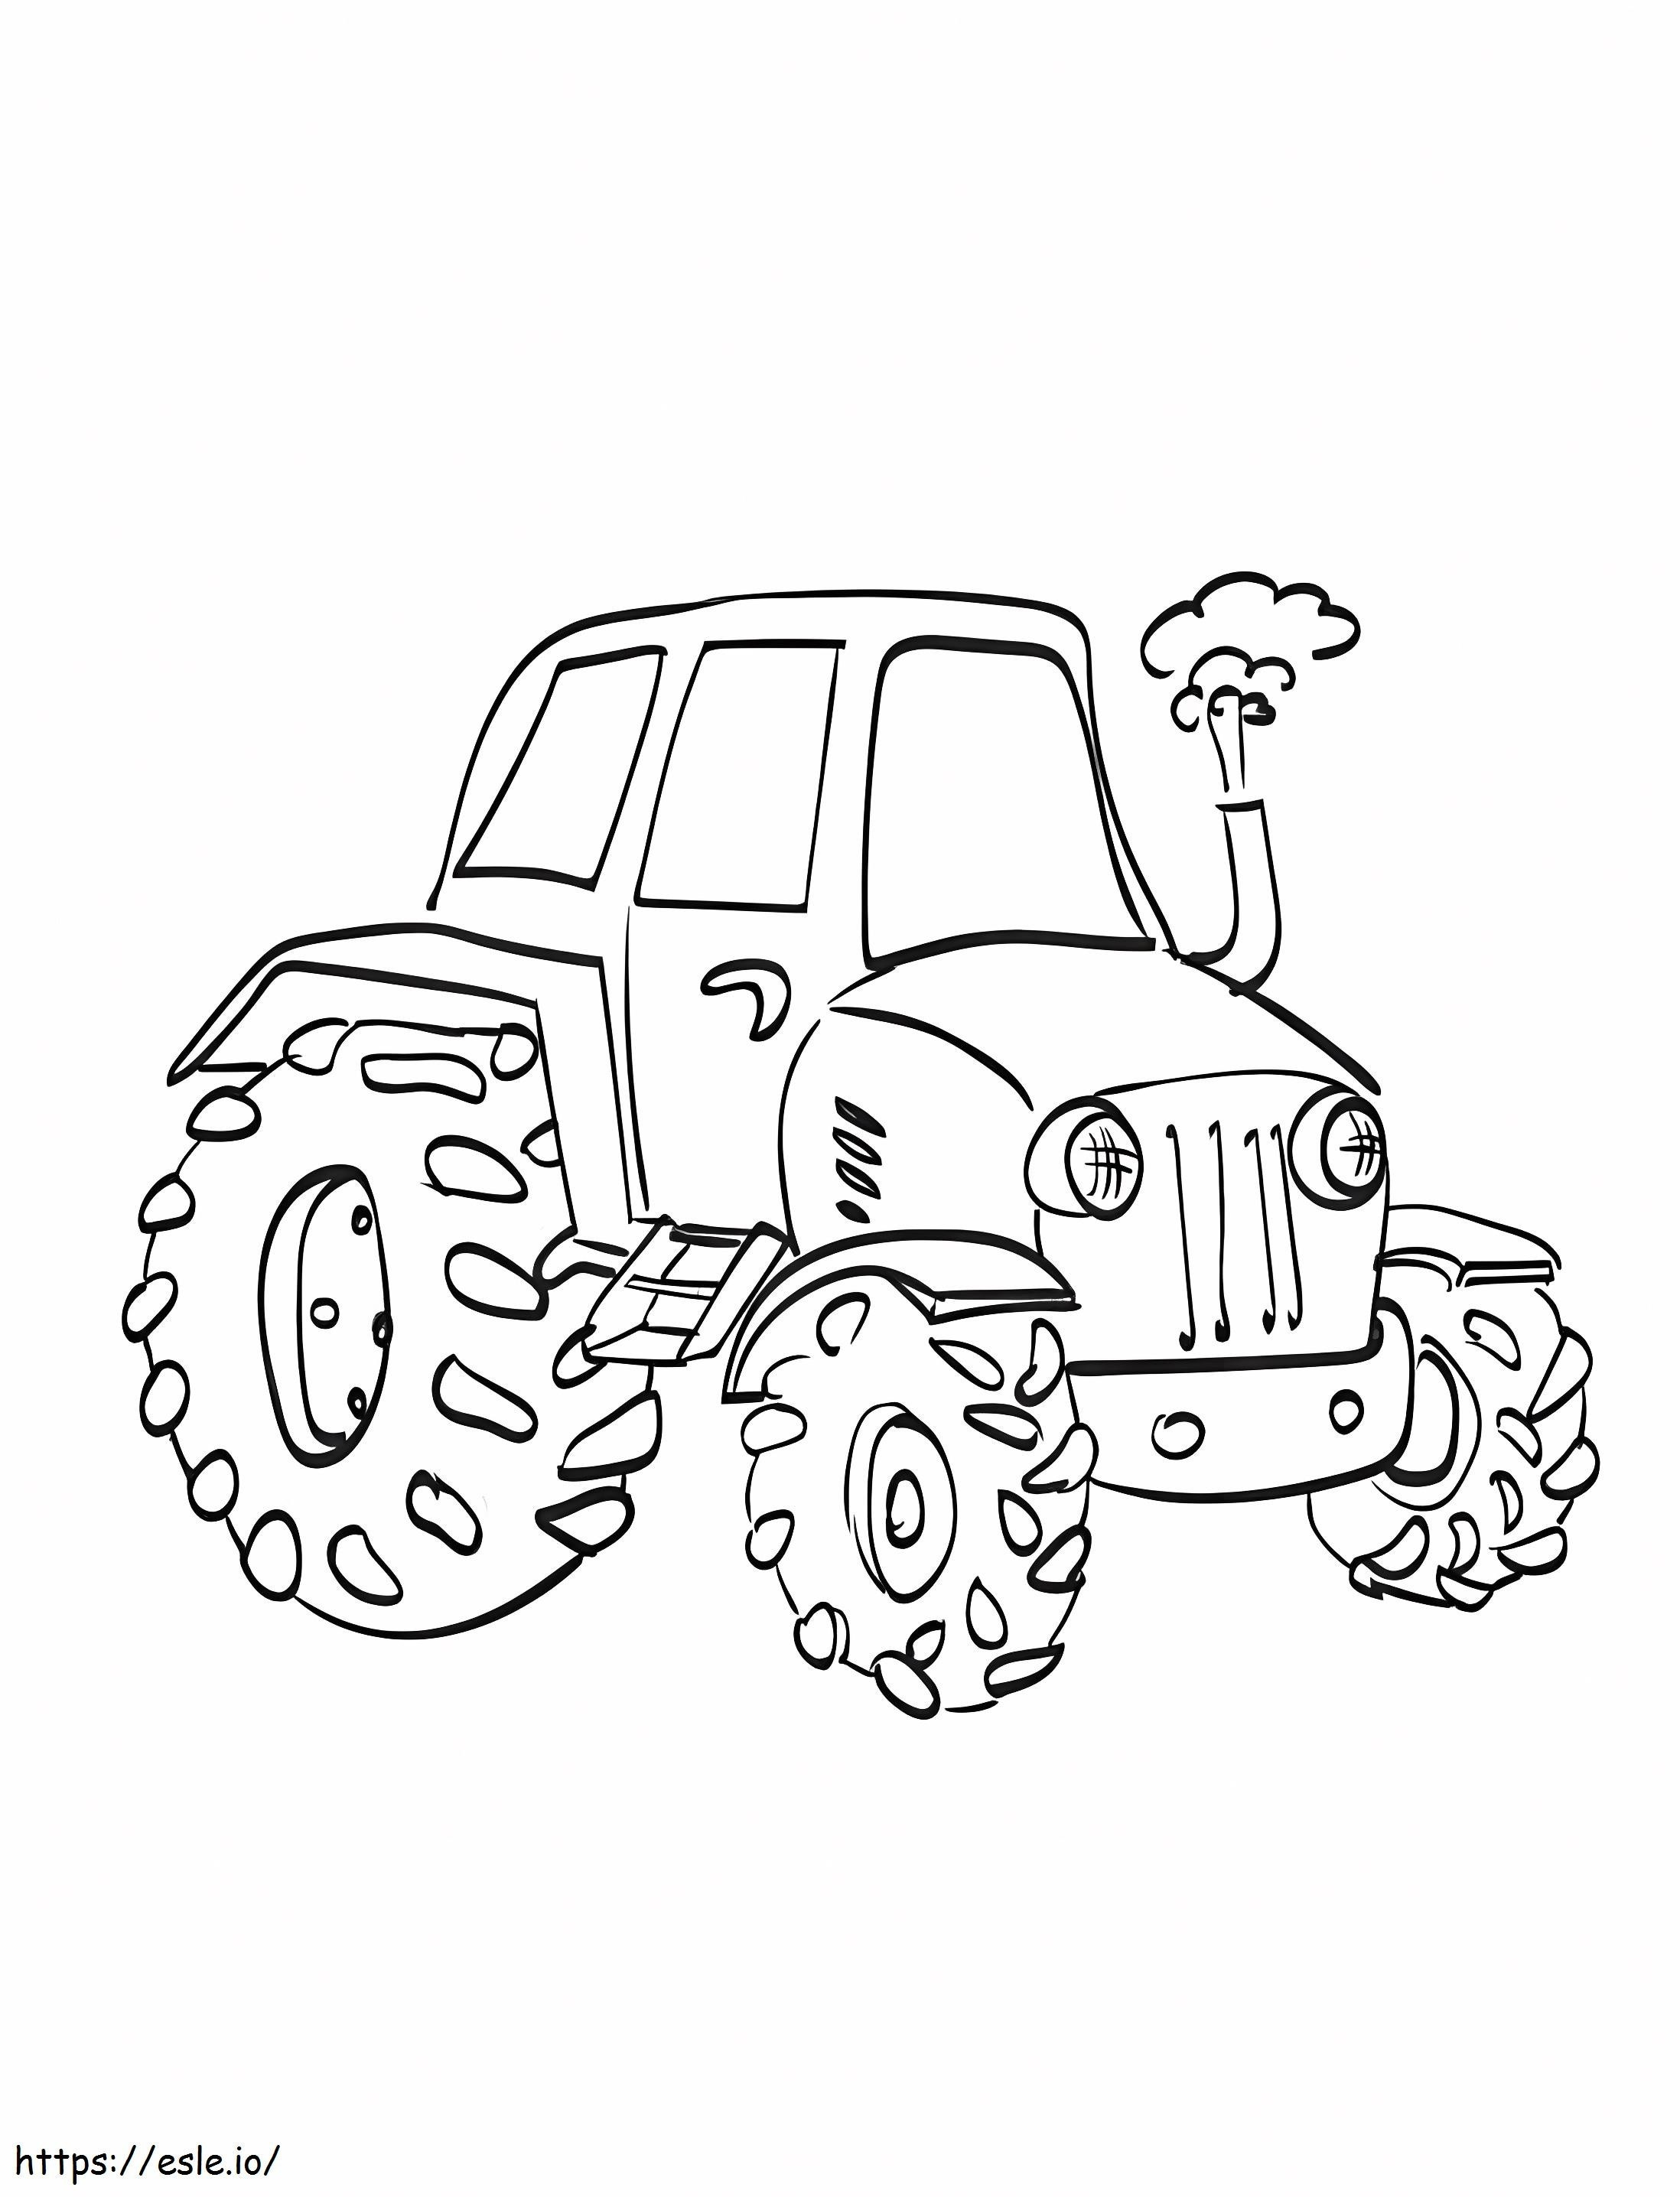 Dirty Tractor coloring page